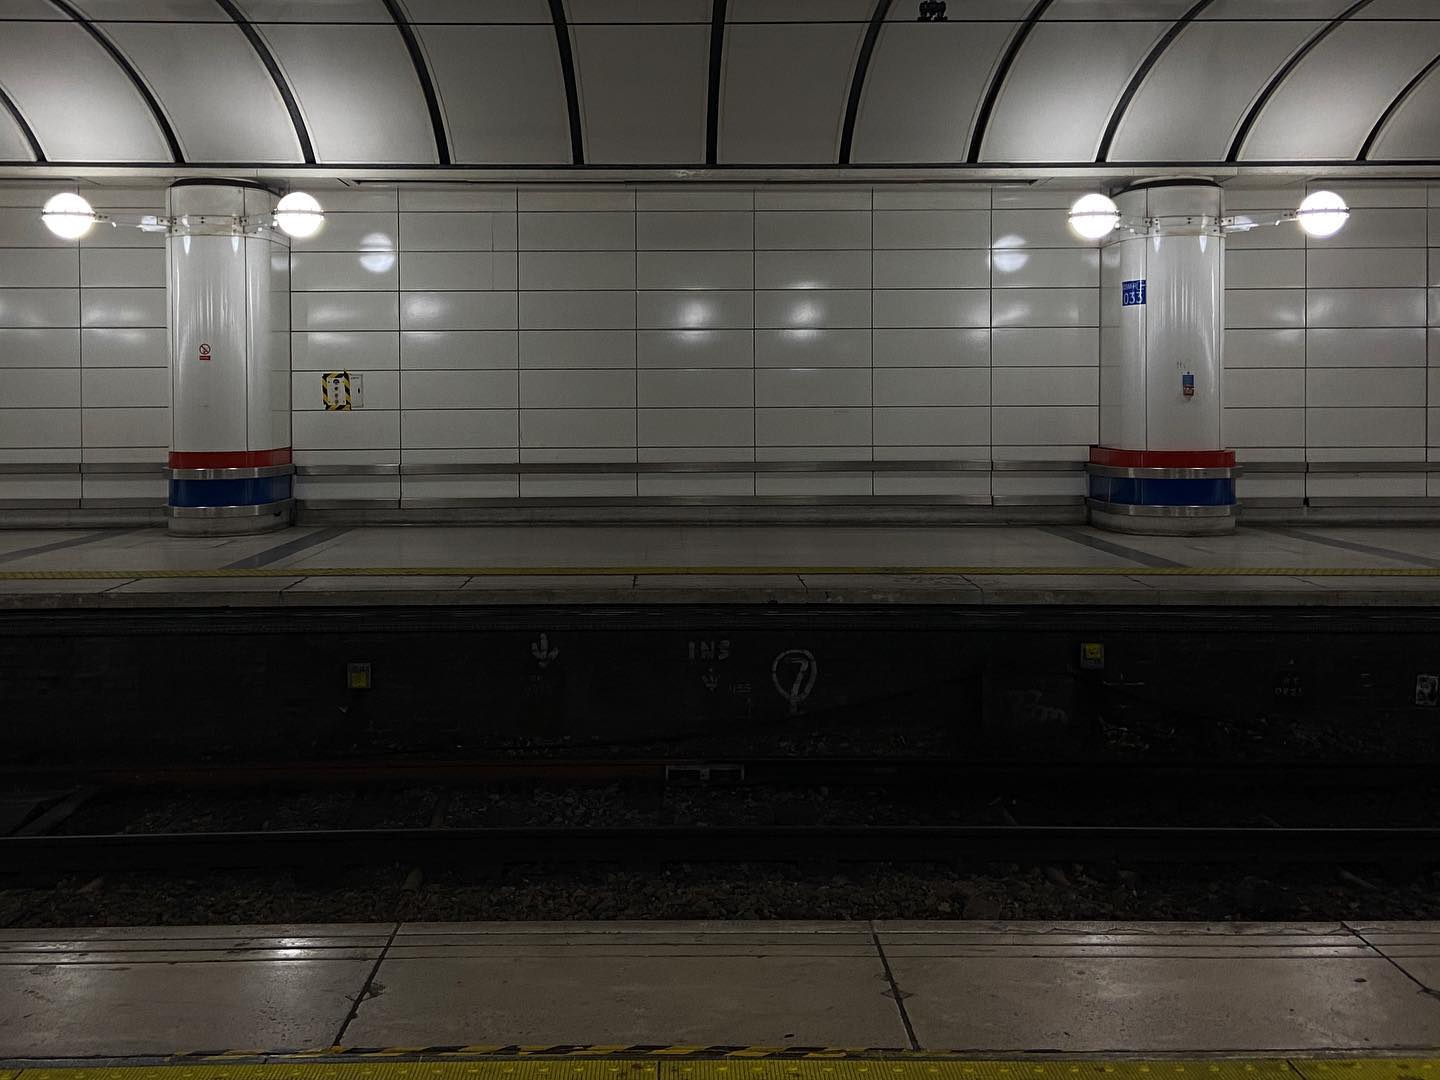 empty platform with globe lights, curving ceiling and parallel tiles. reflections abound in the gloom